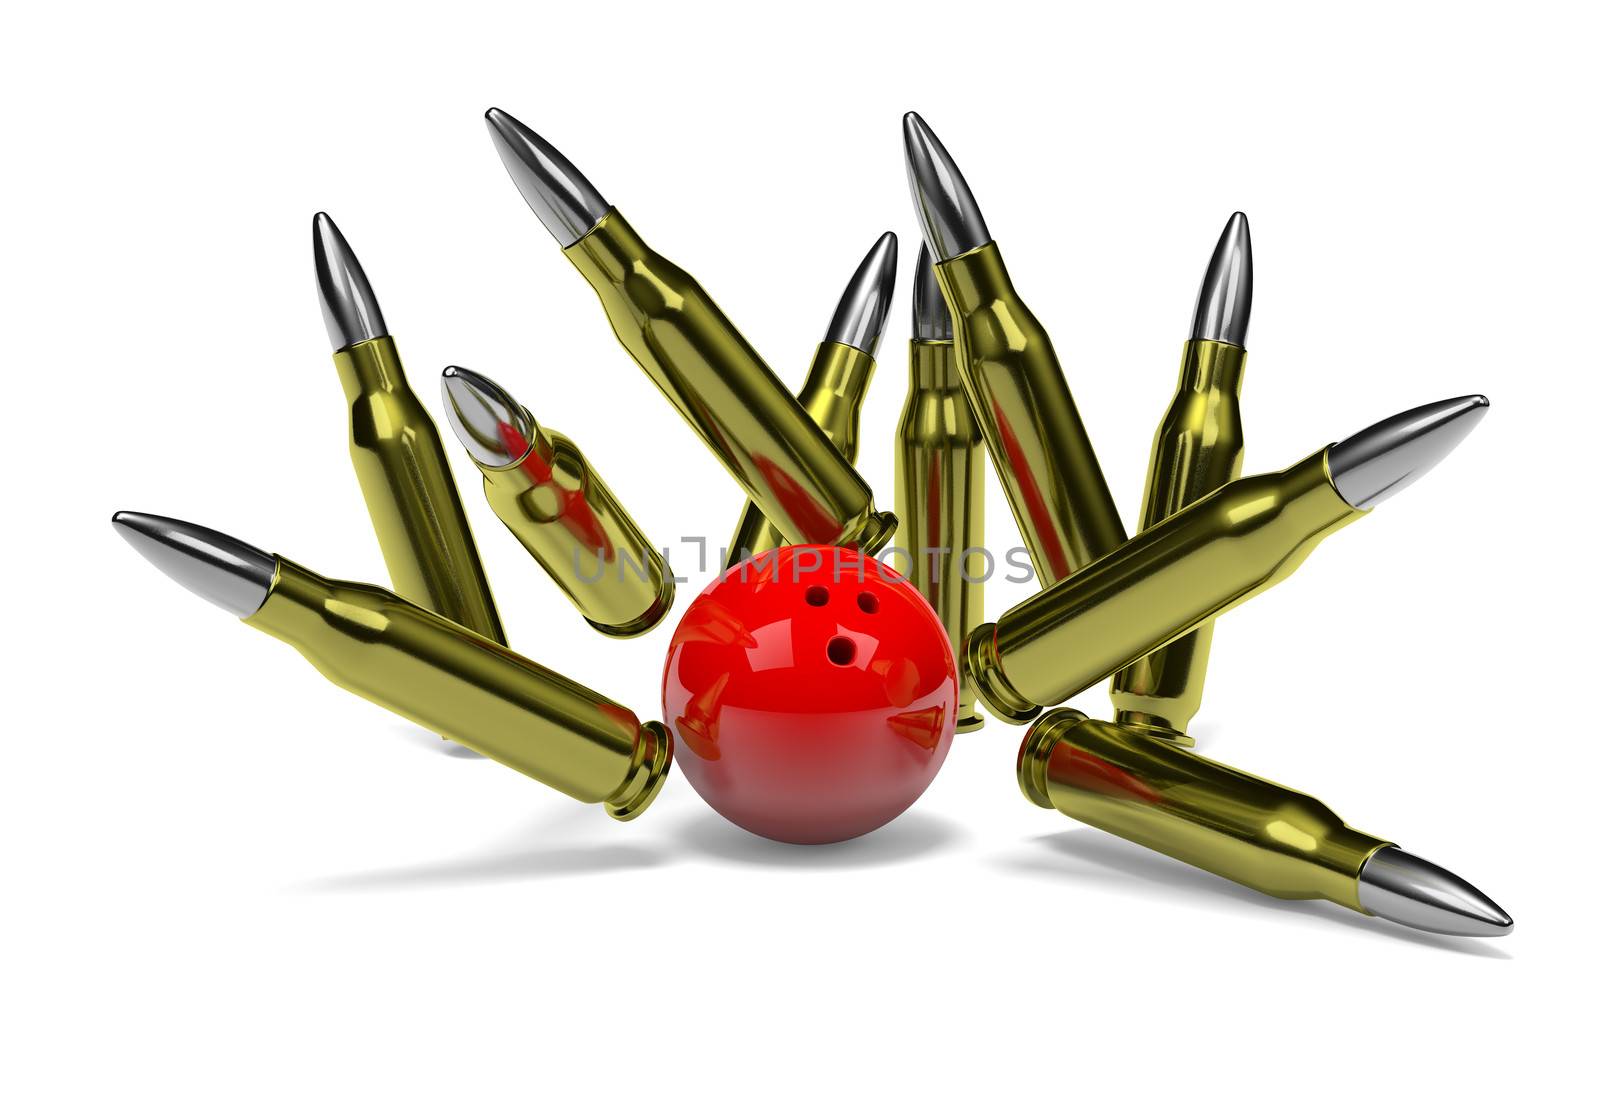 Strike of Bullets with Red Bowling Skittle Ball on White Background 3D Illustration